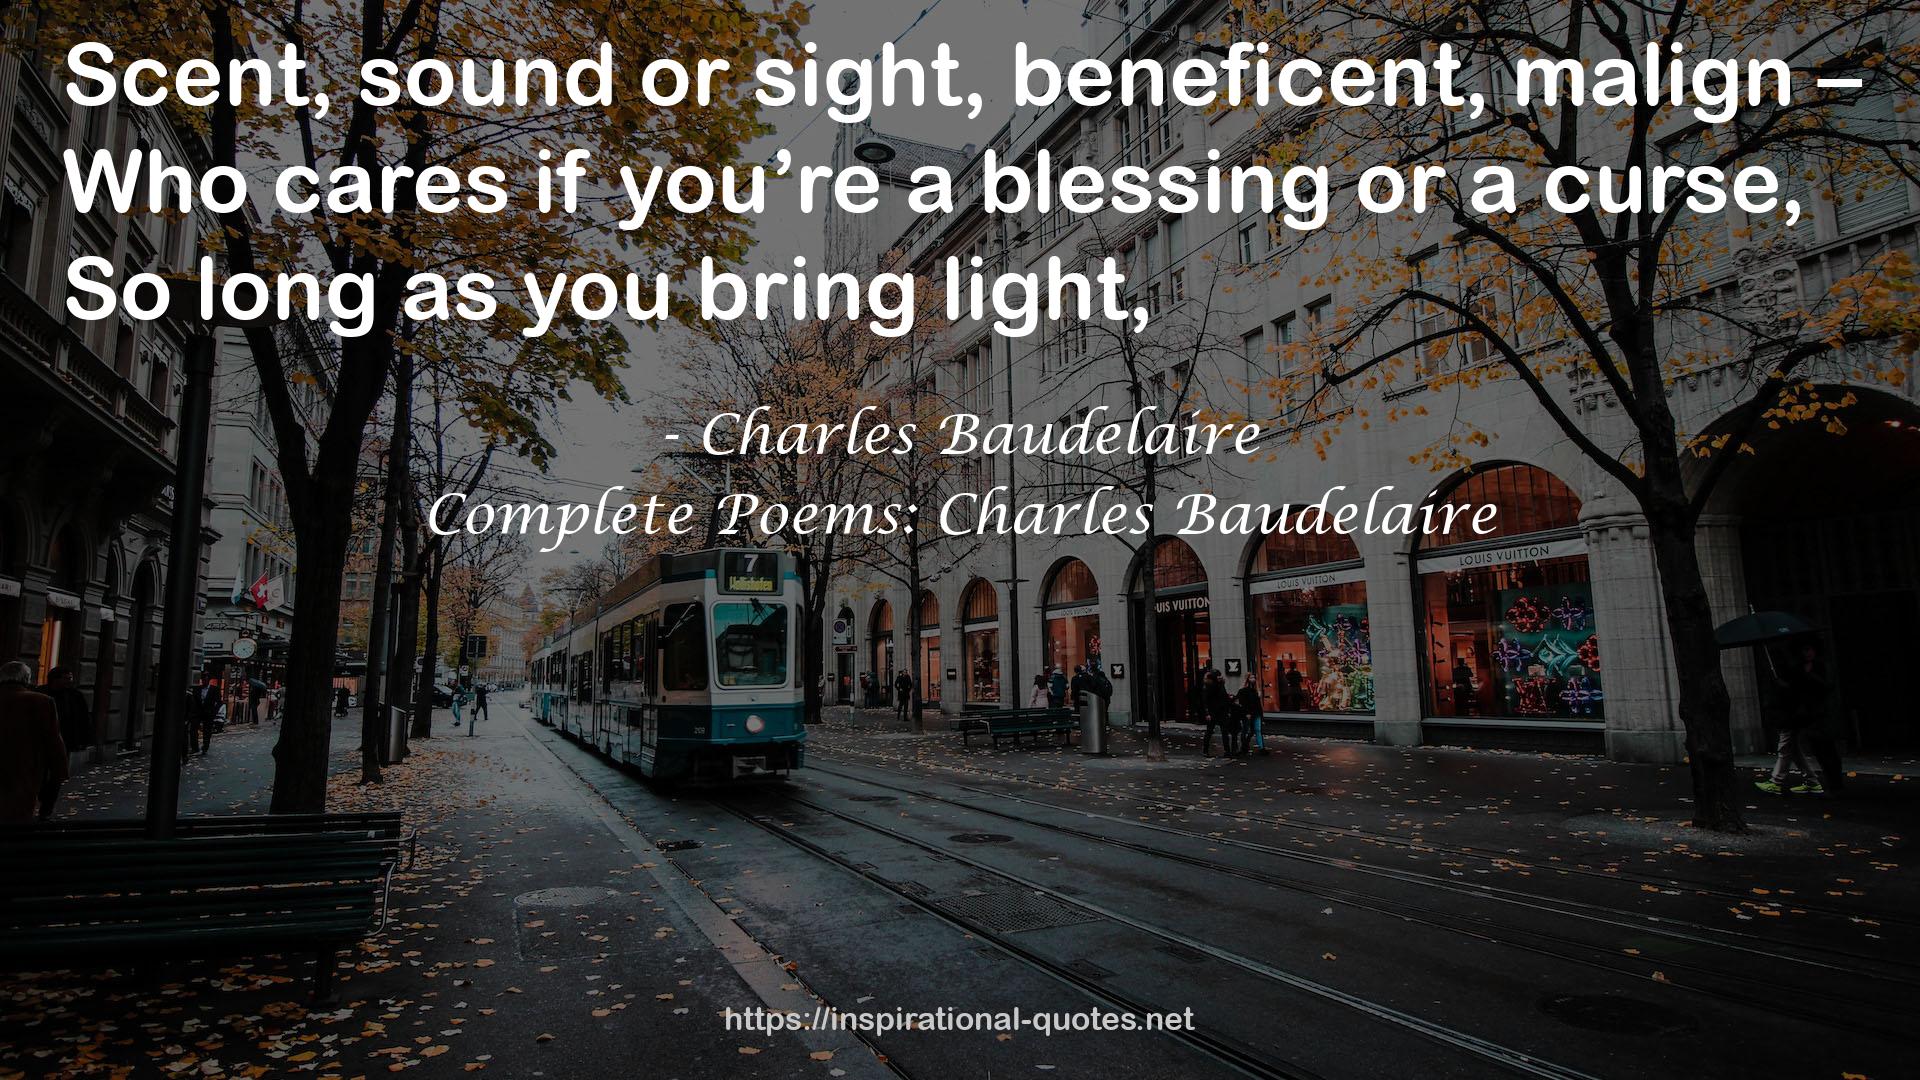 Complete Poems: Charles Baudelaire QUOTES